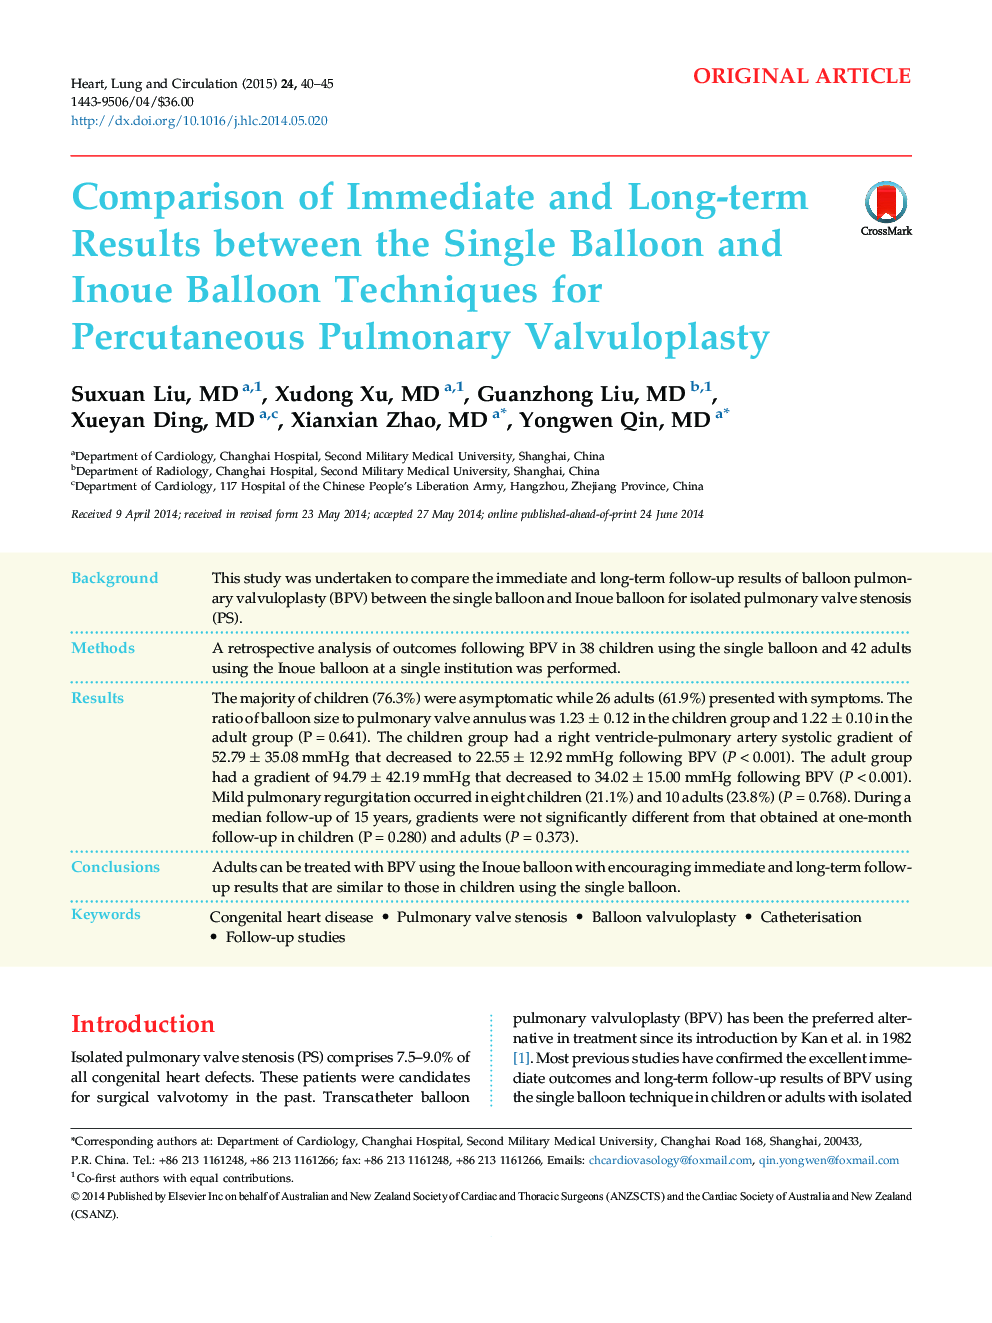 Comparison of Immediate and Long-term Results between the Single Balloon and Inoue Balloon Techniques for Percutaneous Pulmonary Valvuloplasty